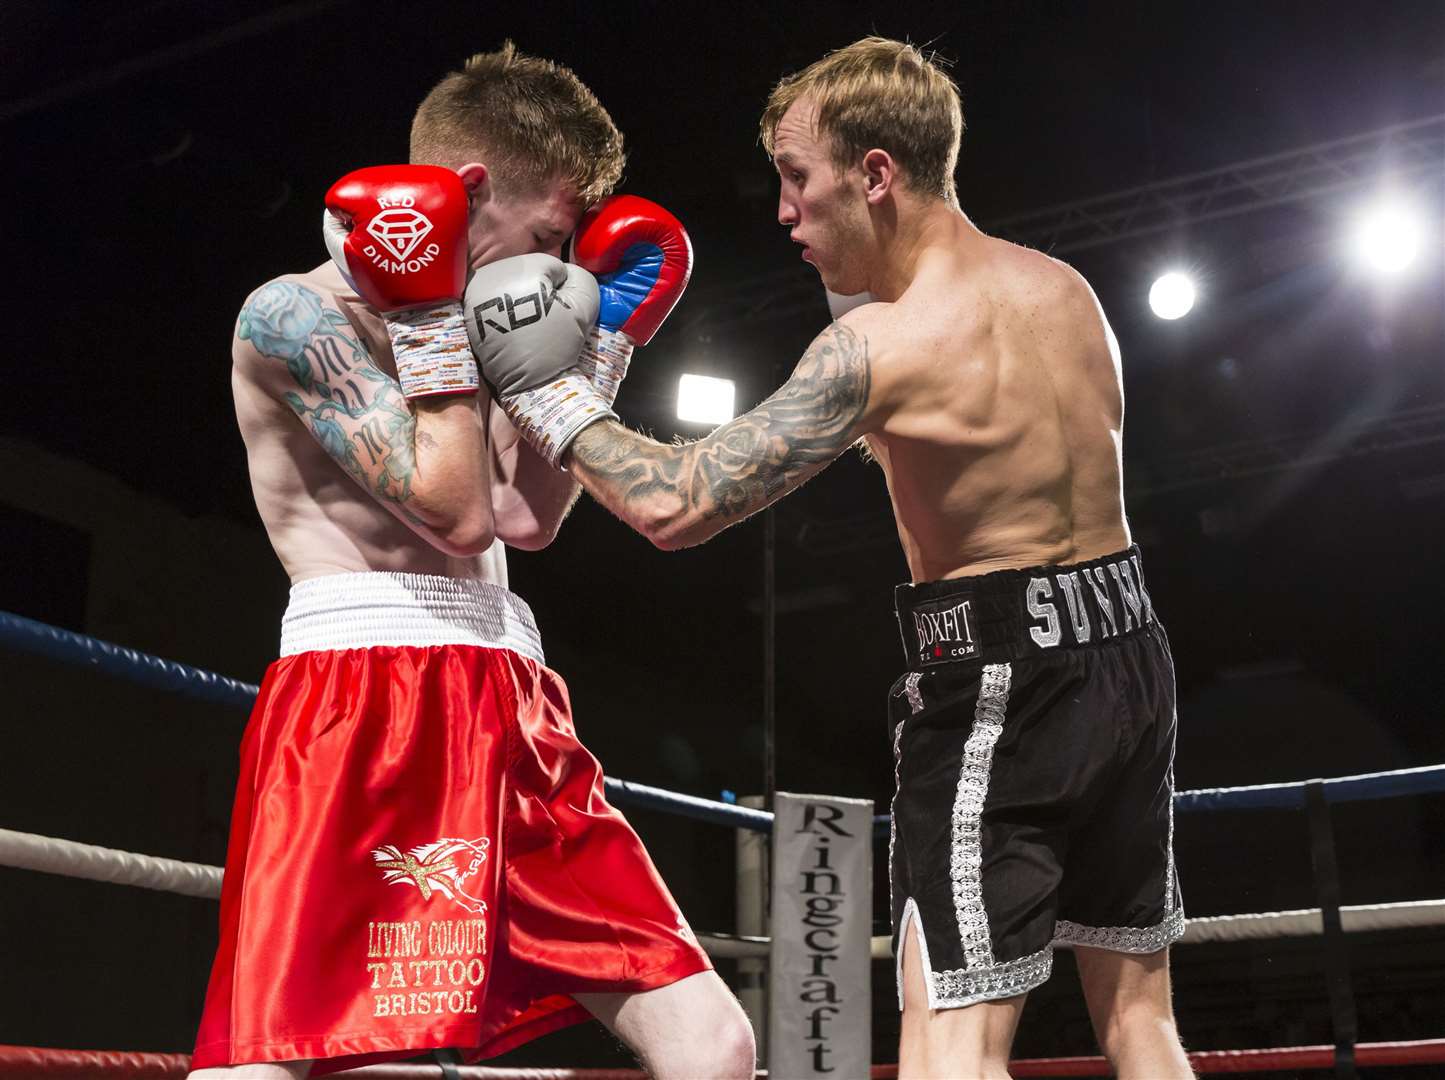 Featherweight Jack Budge takes on Ricky Leach (red shorts) at The Homecoming event, Mote Park Picture: Martin Apps